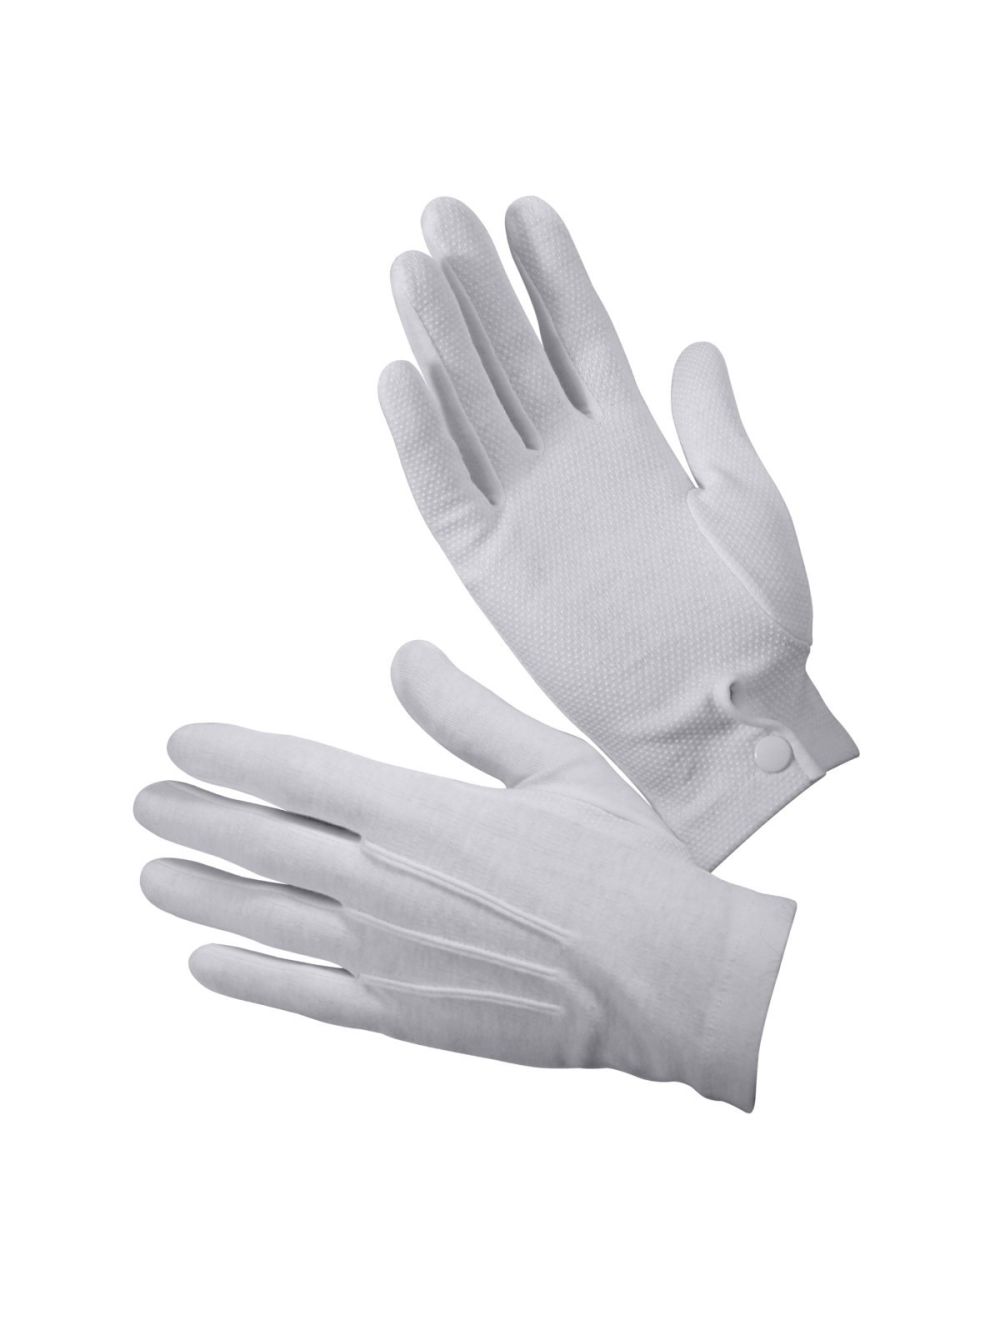 Cotton Parade Gloves with Snap Closure, Cotton Gloves